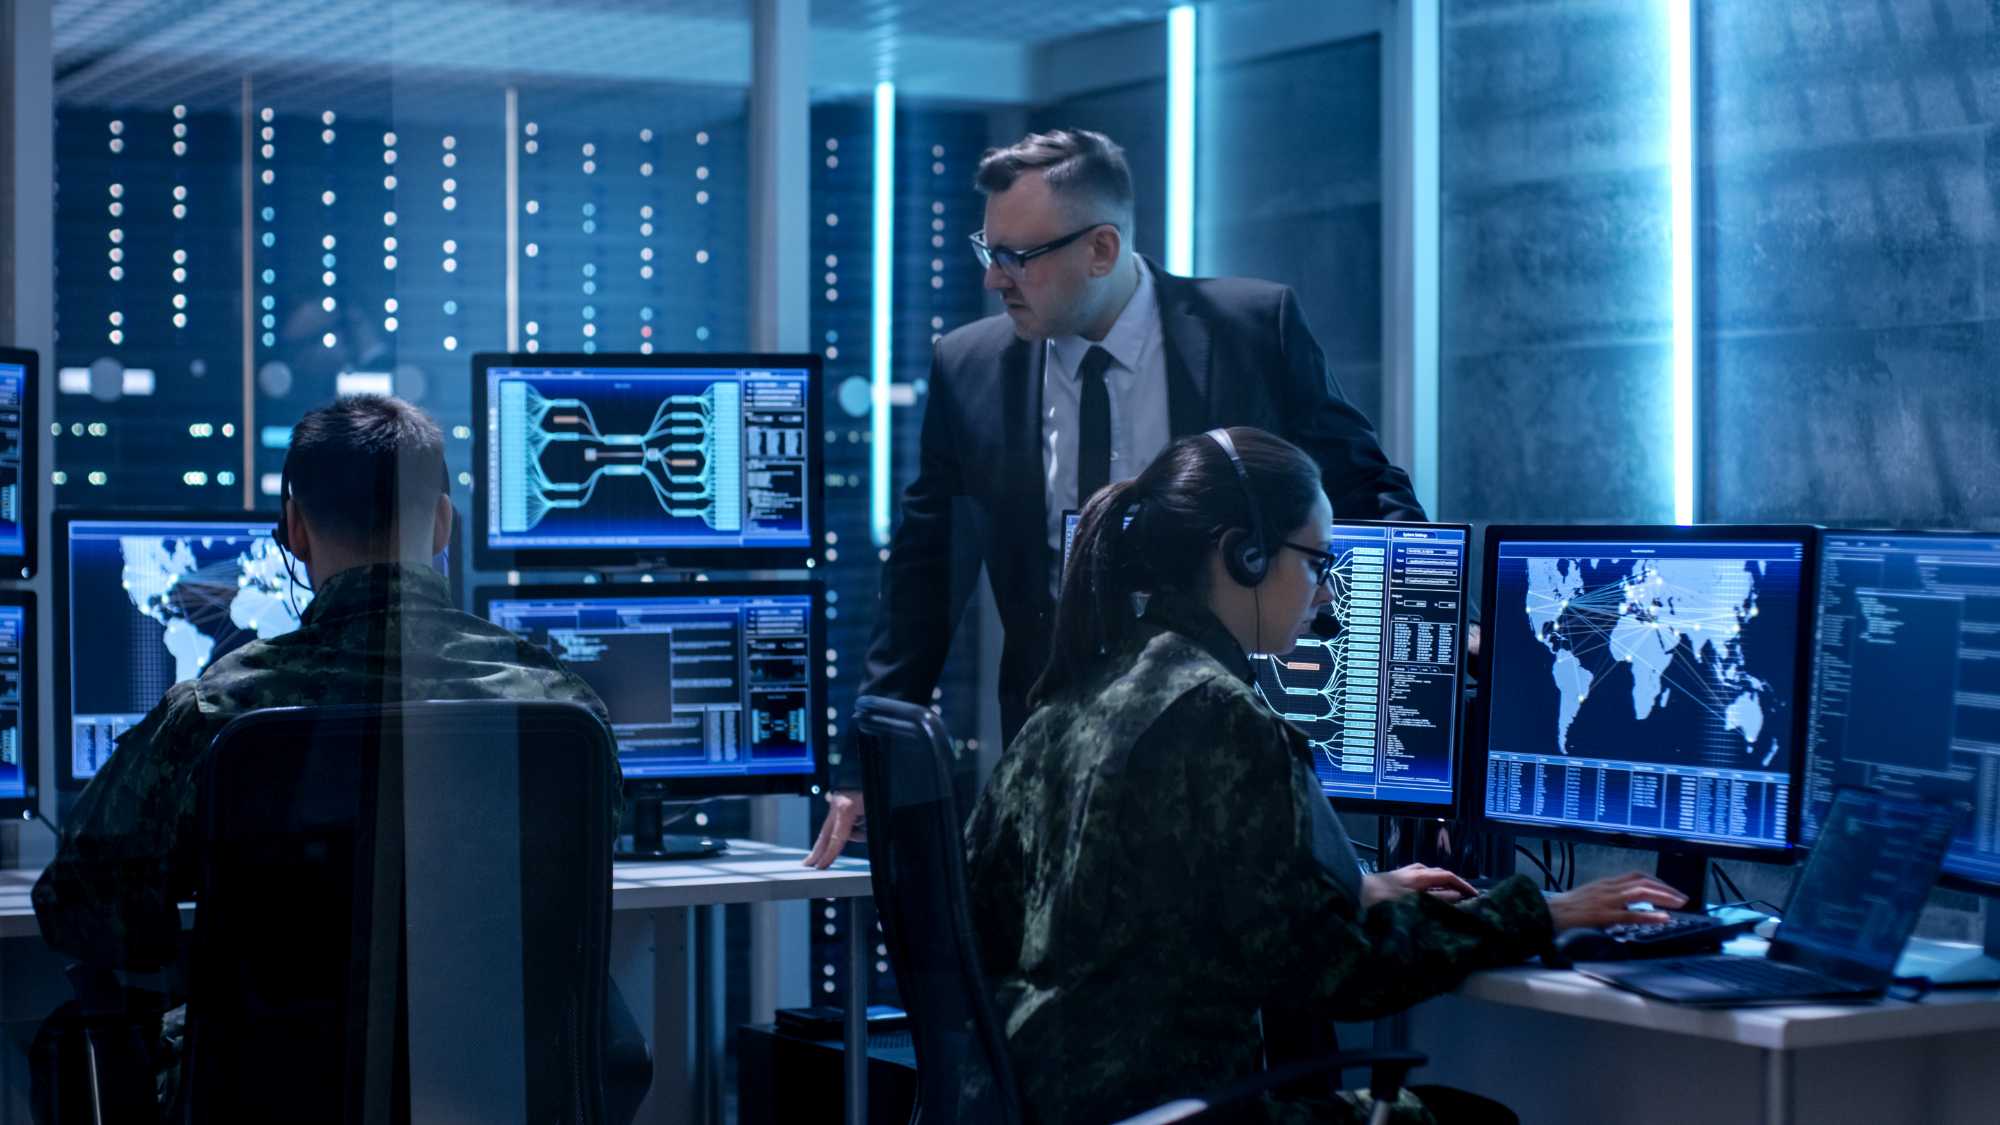 people-in-camo-working-at-computers-with-person-in-suite-watching